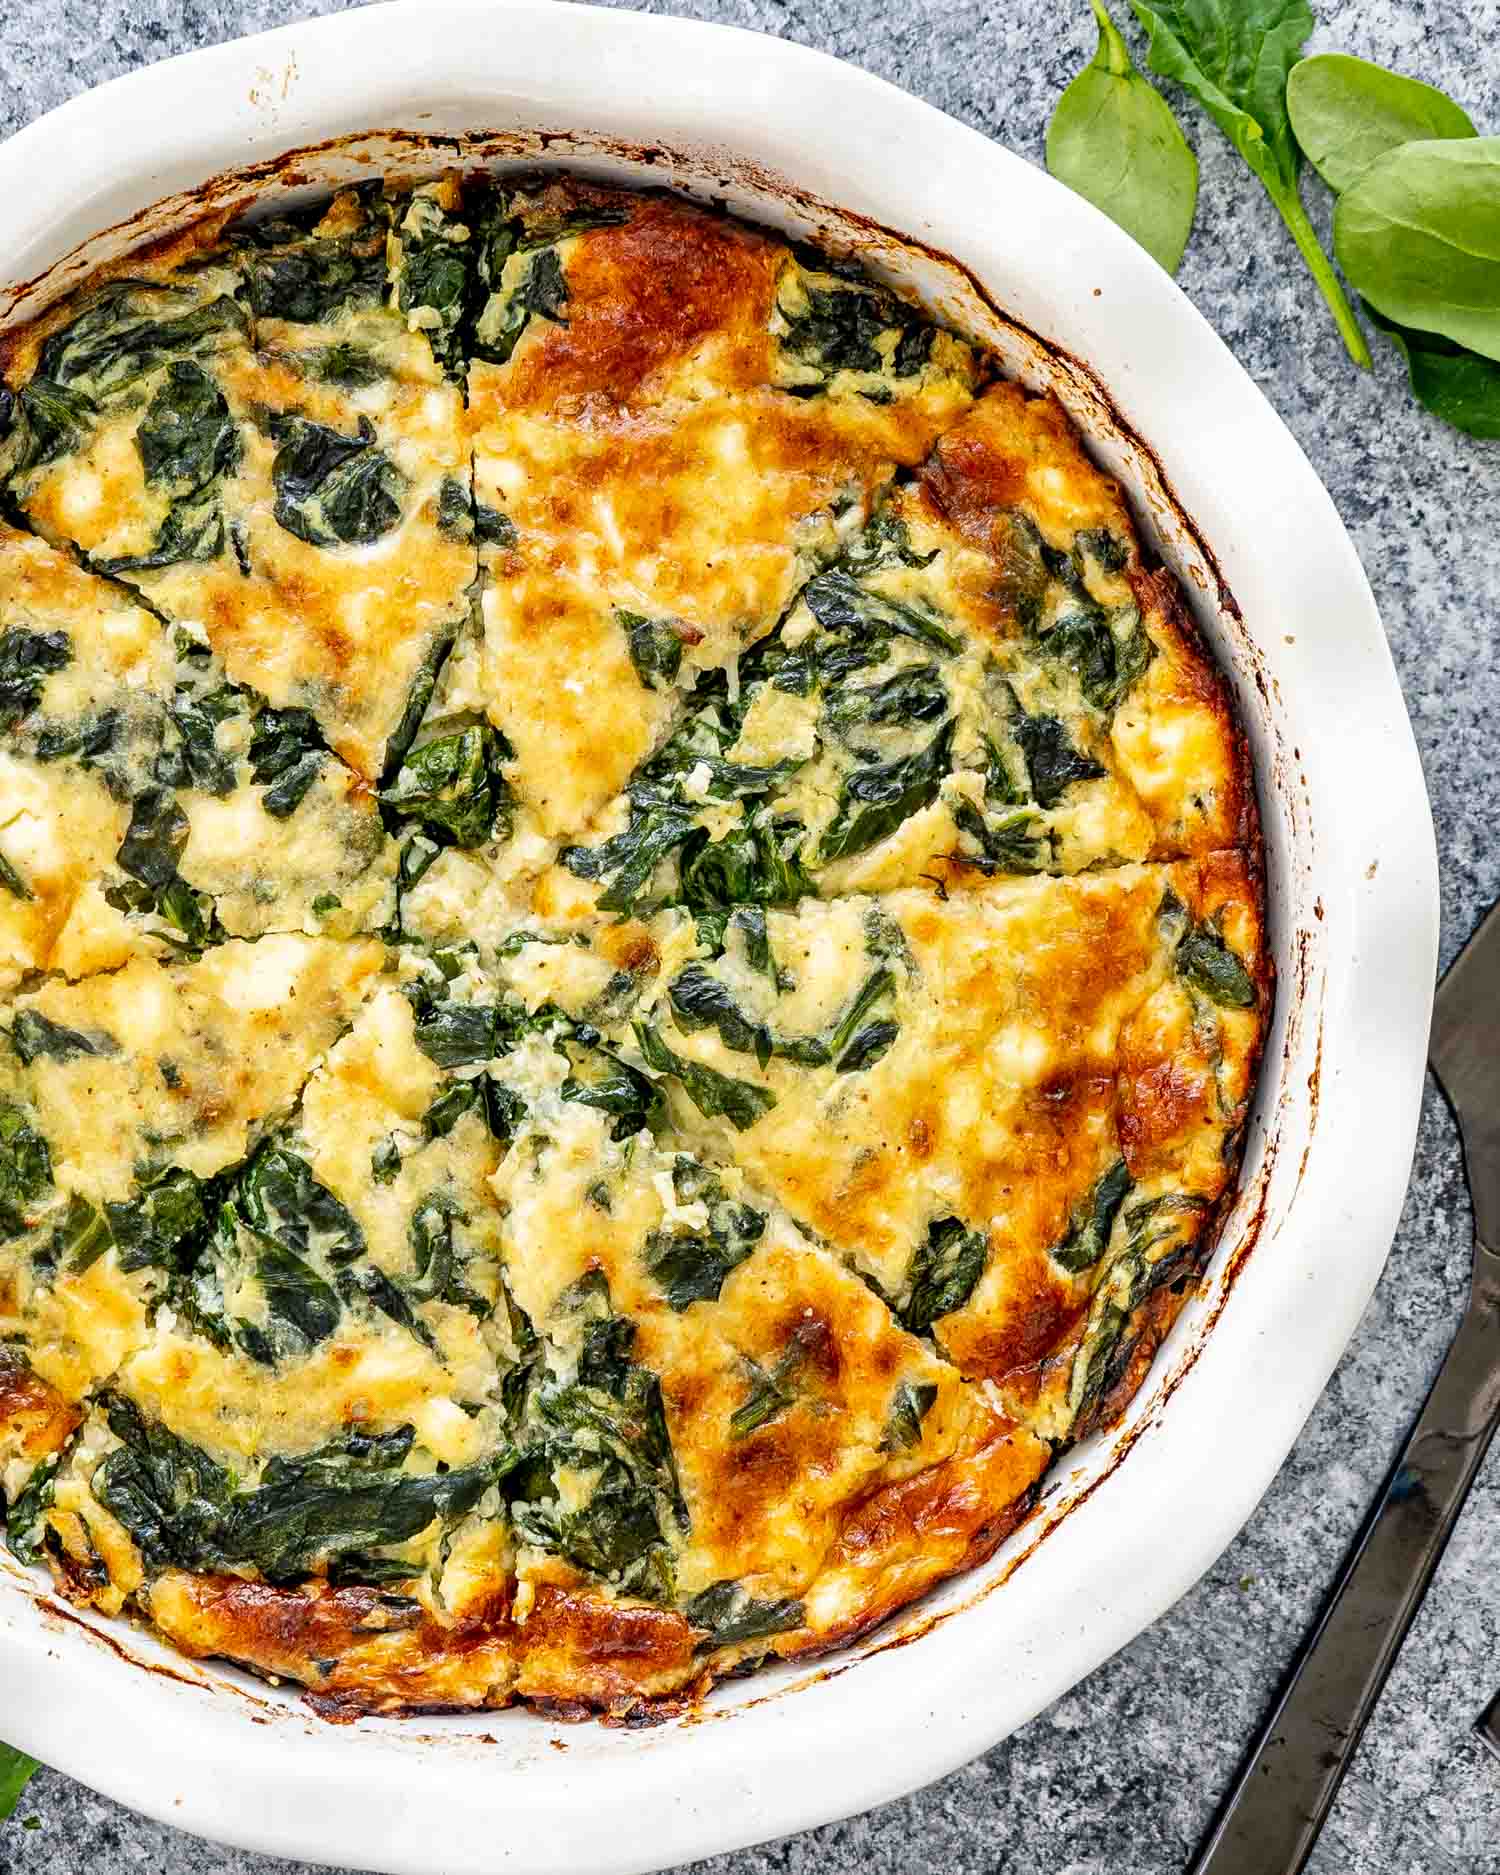 A golden brown, crustless spinach quiche in a white dish, with visible layers of cheese and spinach.